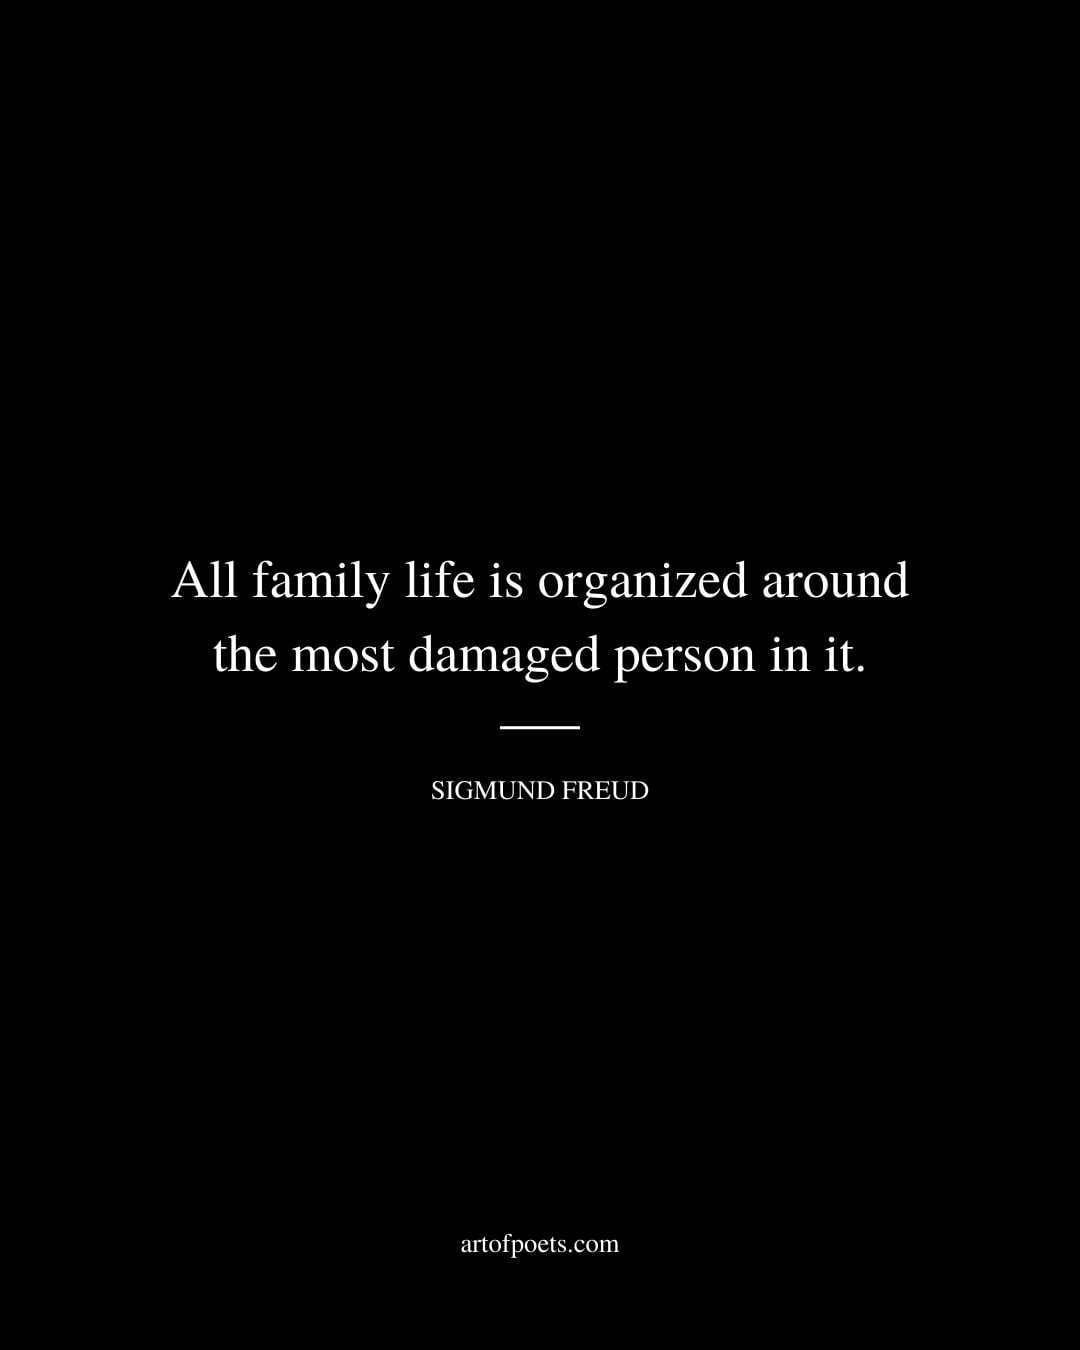 All family life is organized around the most damaged person in it